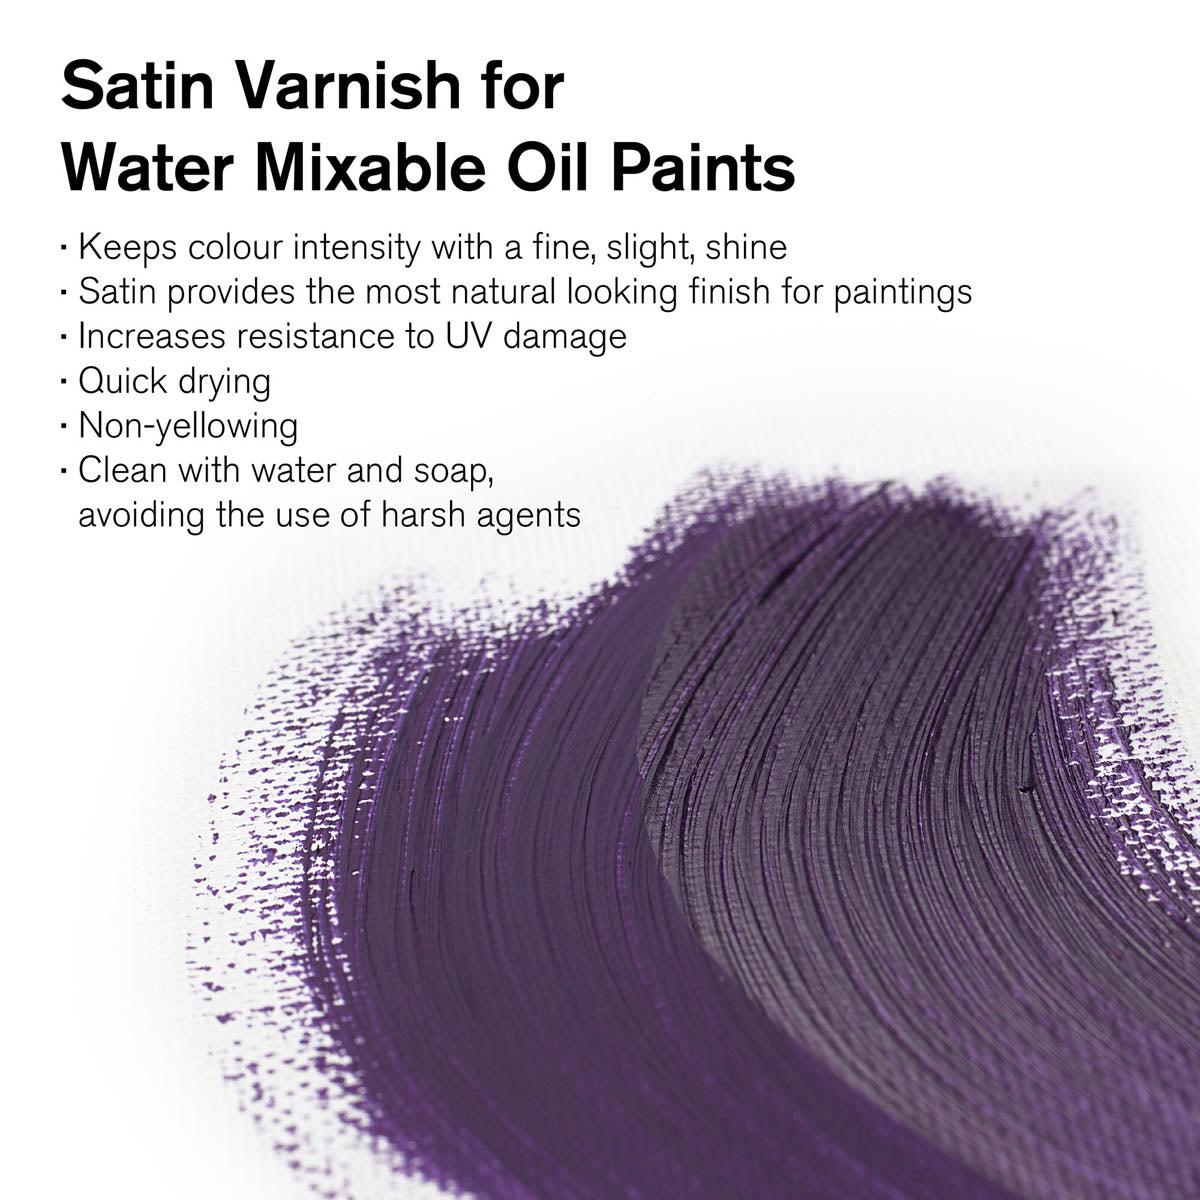 Winsor and Newton - Water Mixable Satin Varnish - 250ml